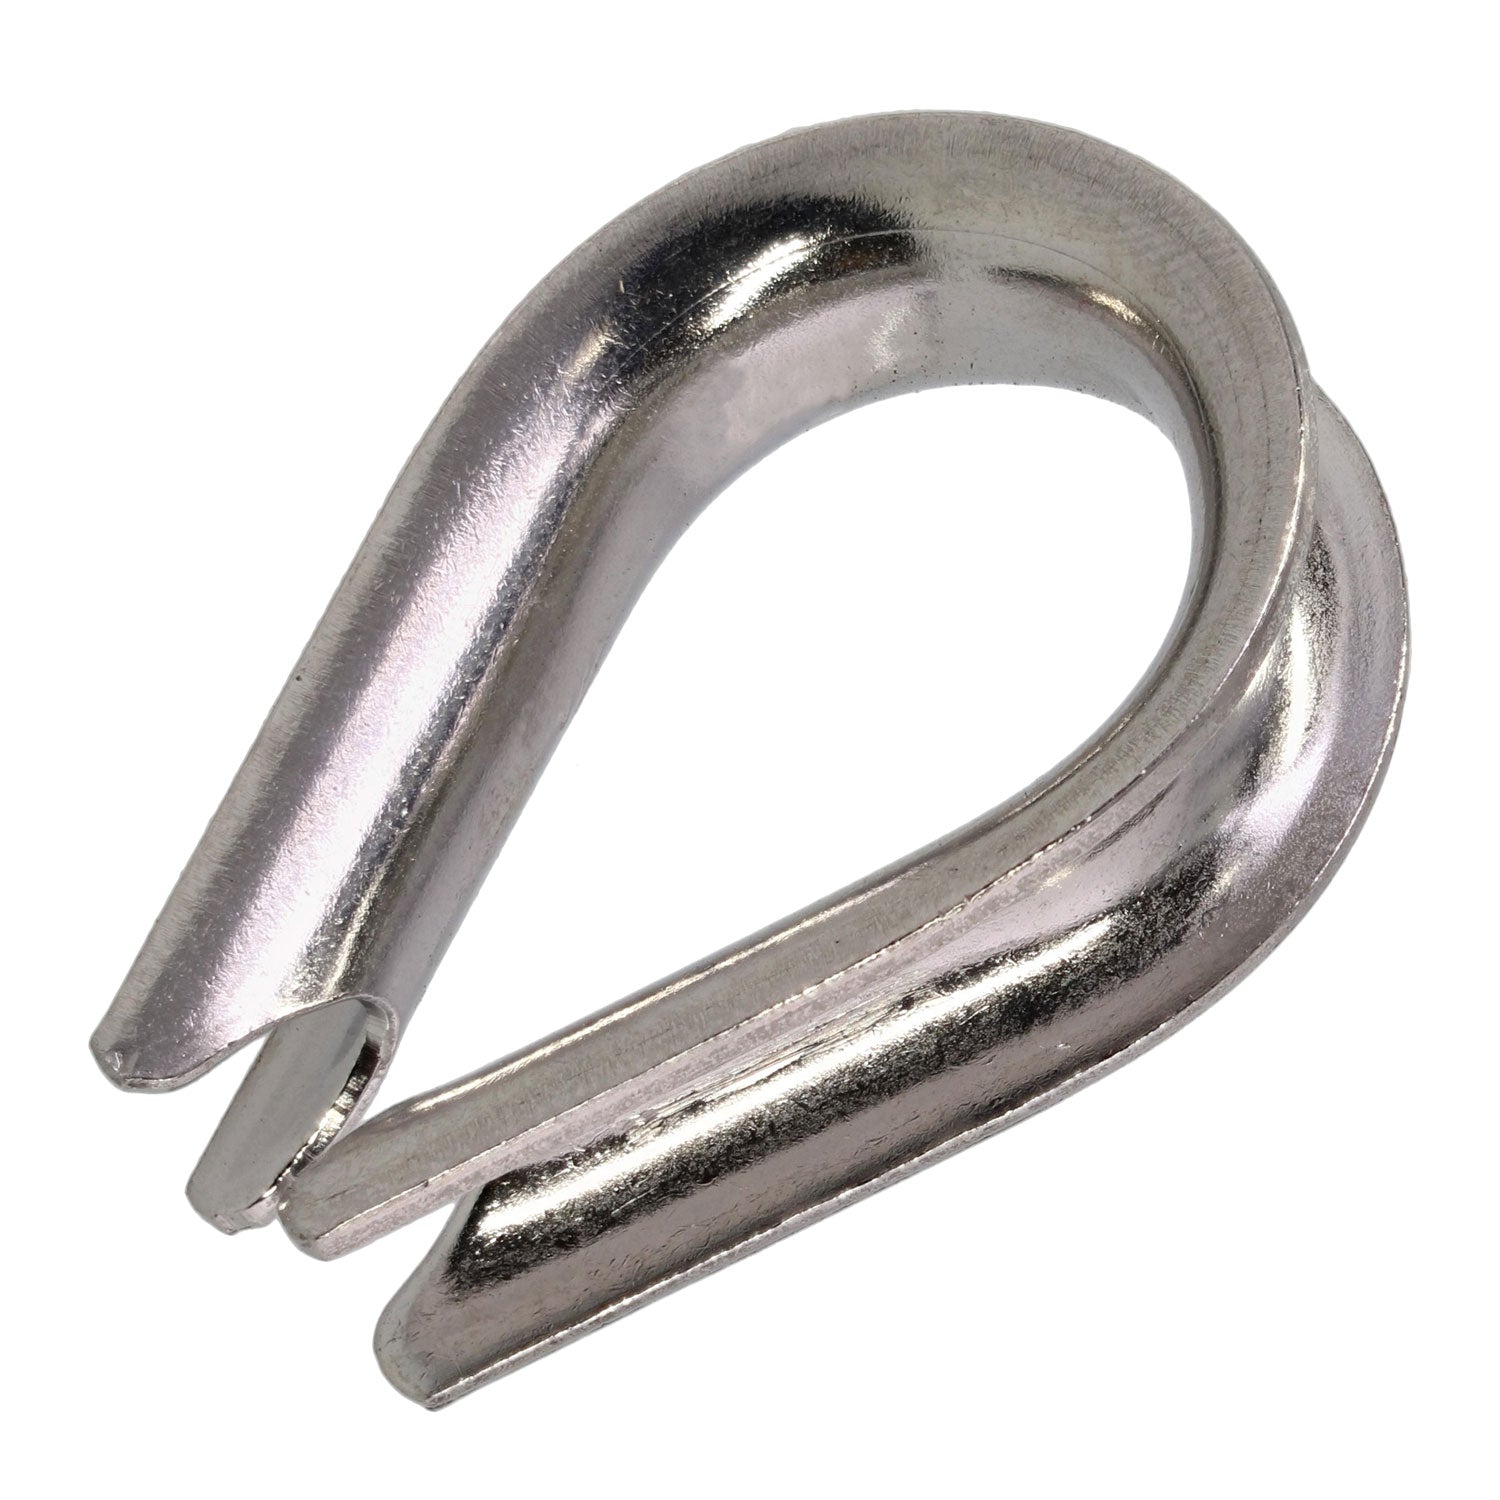 Stainless Steel Light Duty Wire Rope Thimble